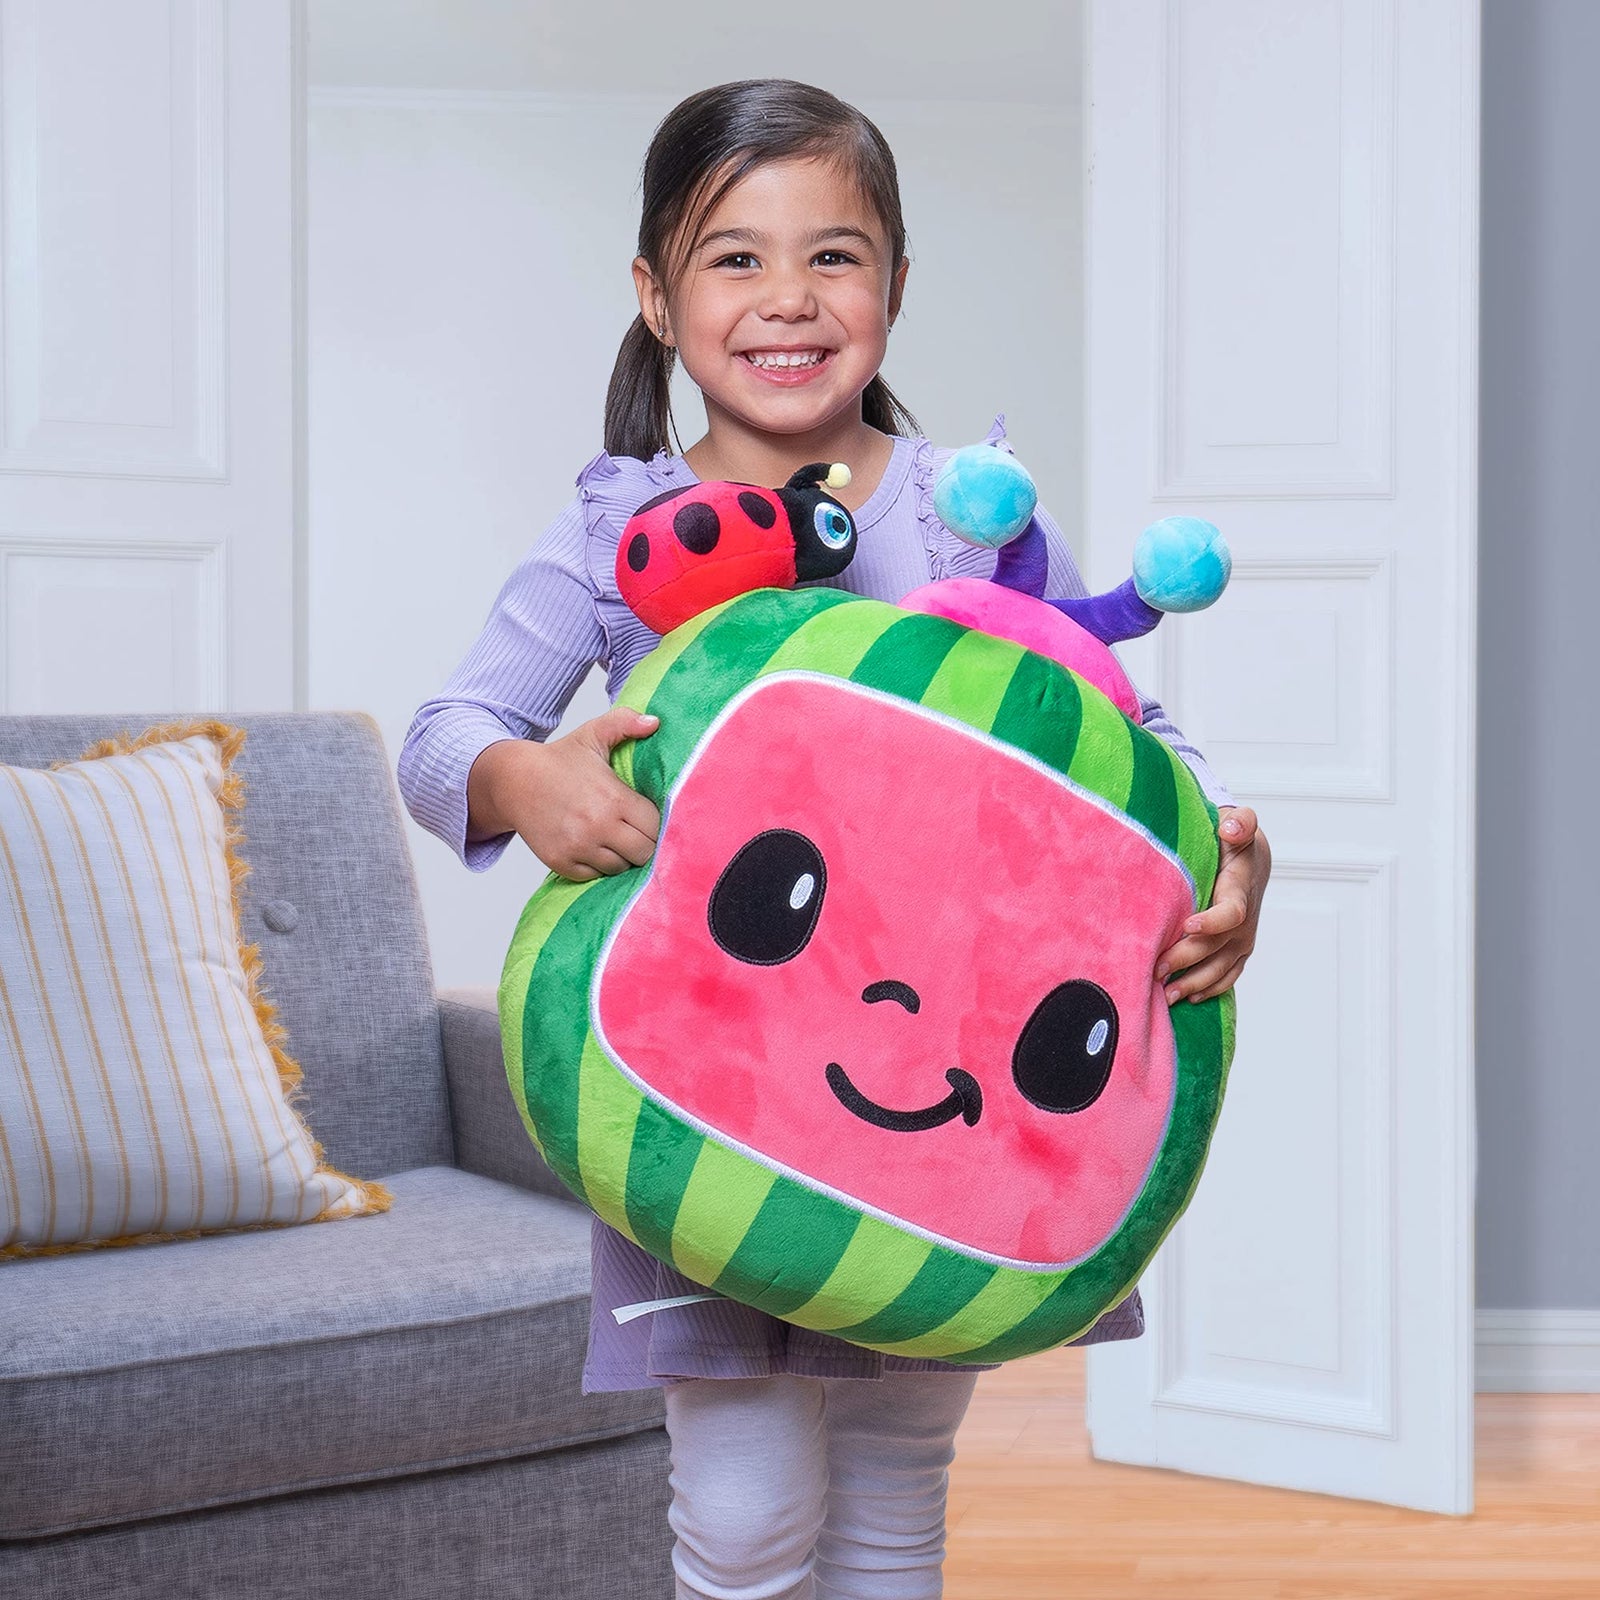 CoComelon Pillow Plush, 18” - Soft, Cuddly, Snuggly, Extra Large Pillow - Toys for Kids, Toddlers, and Preschoolers